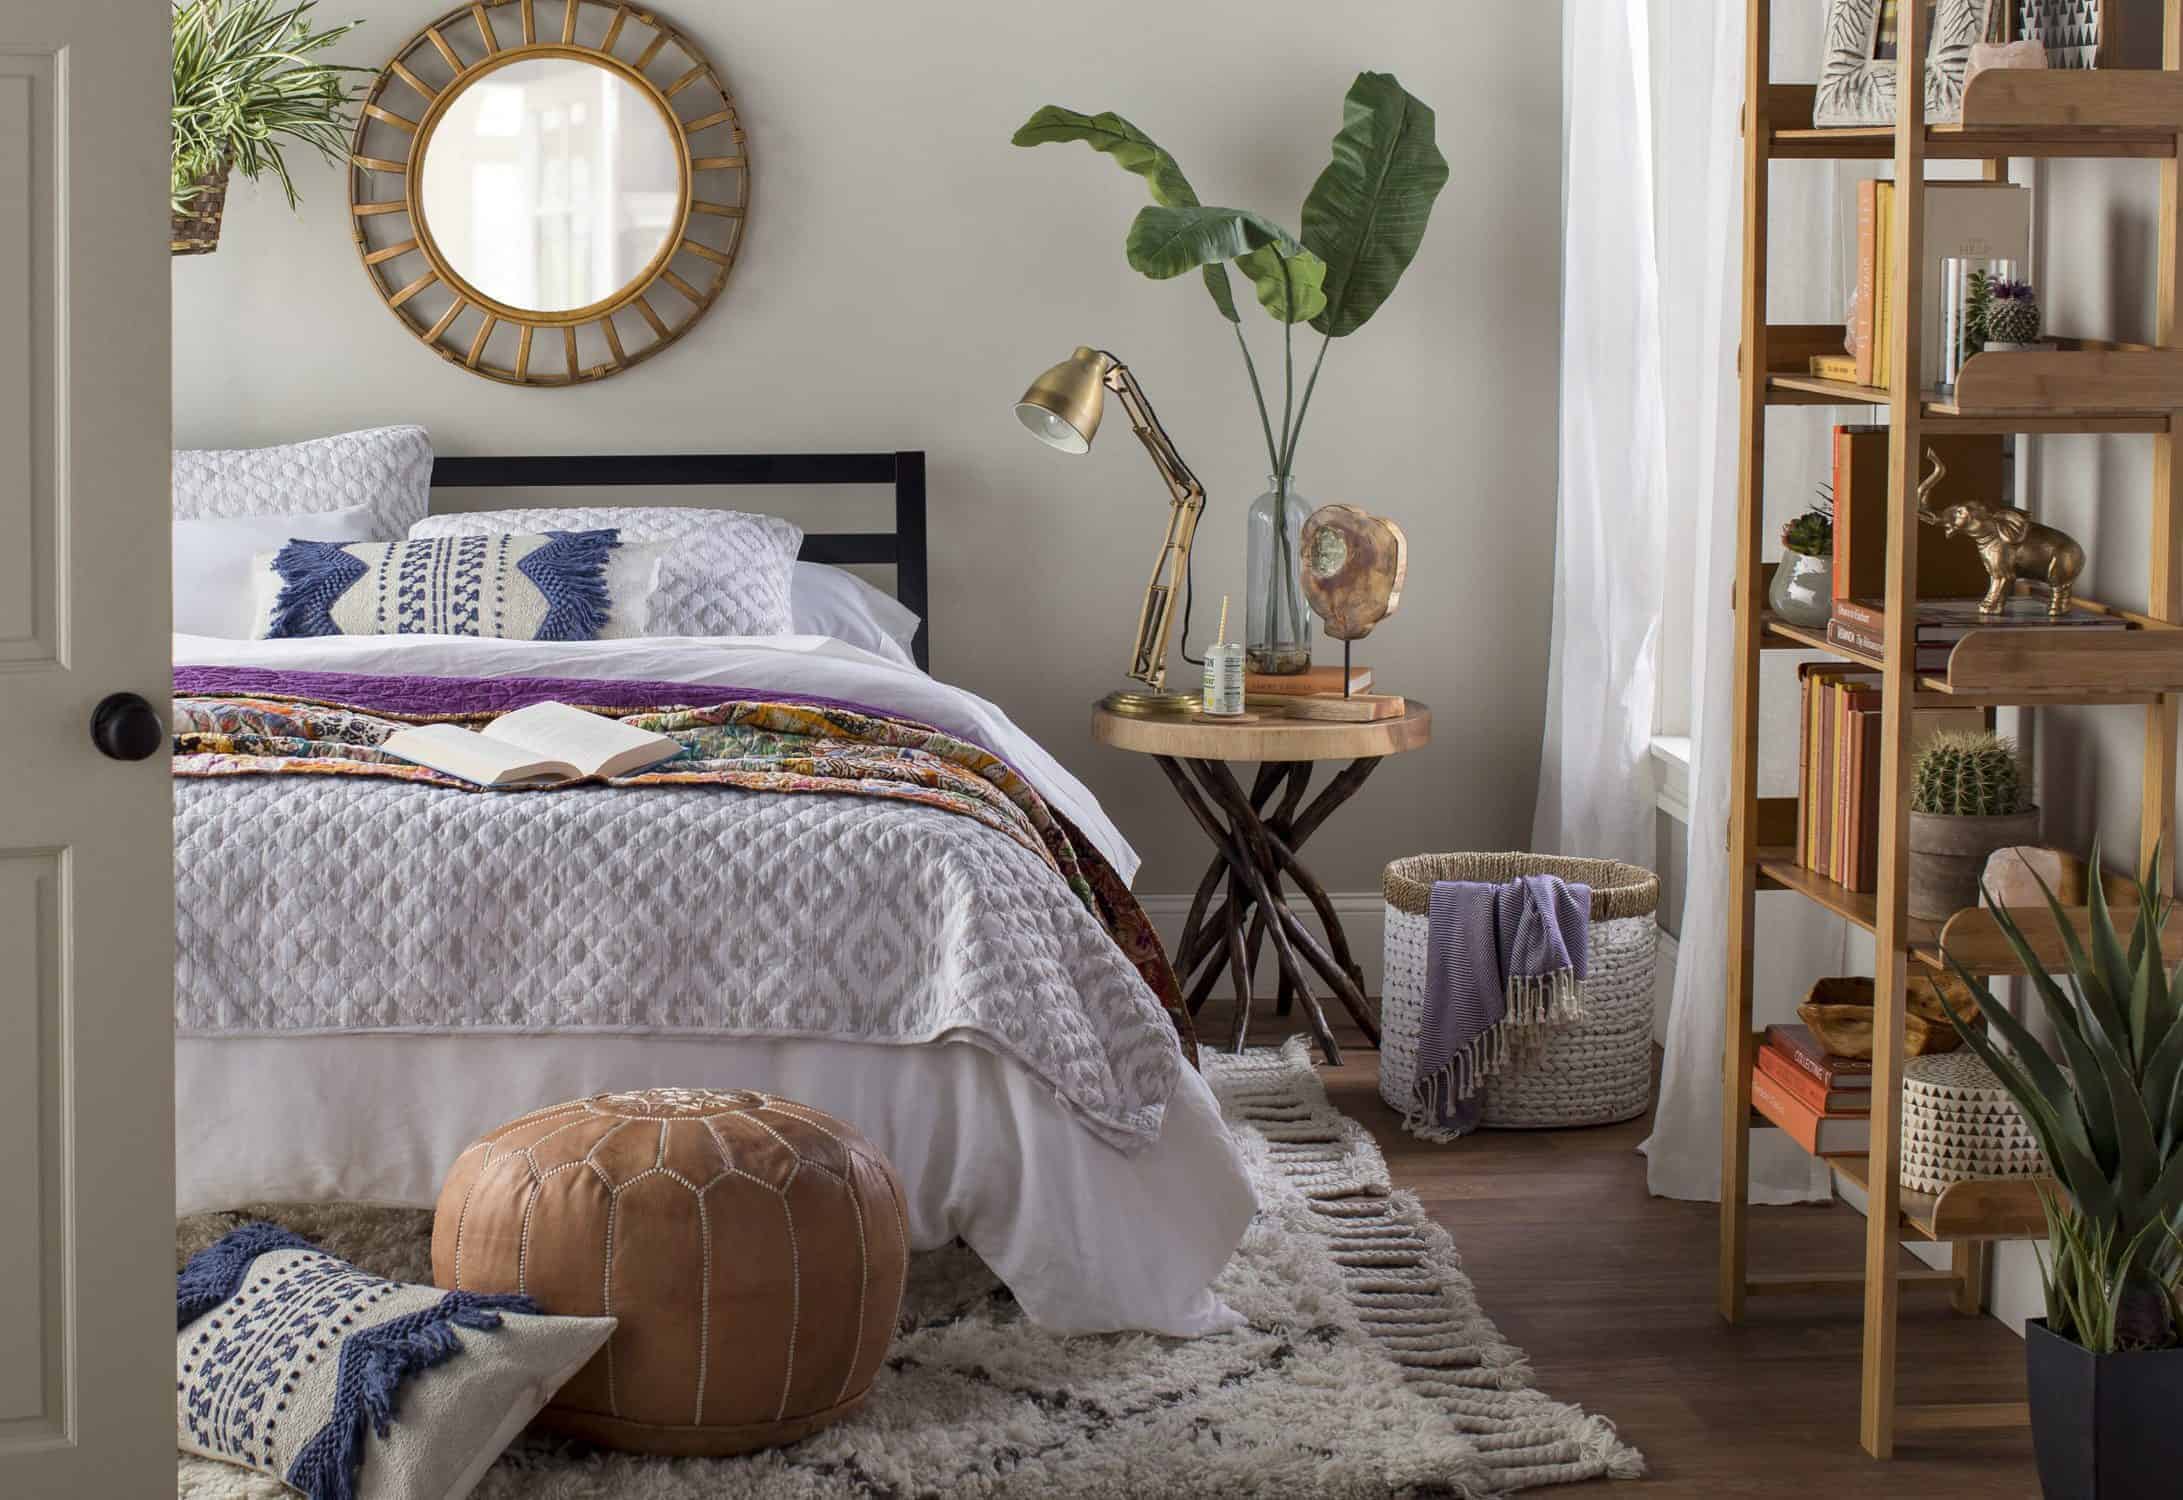 Creating Your Tropical Bedroom with These 11 Design Ideas